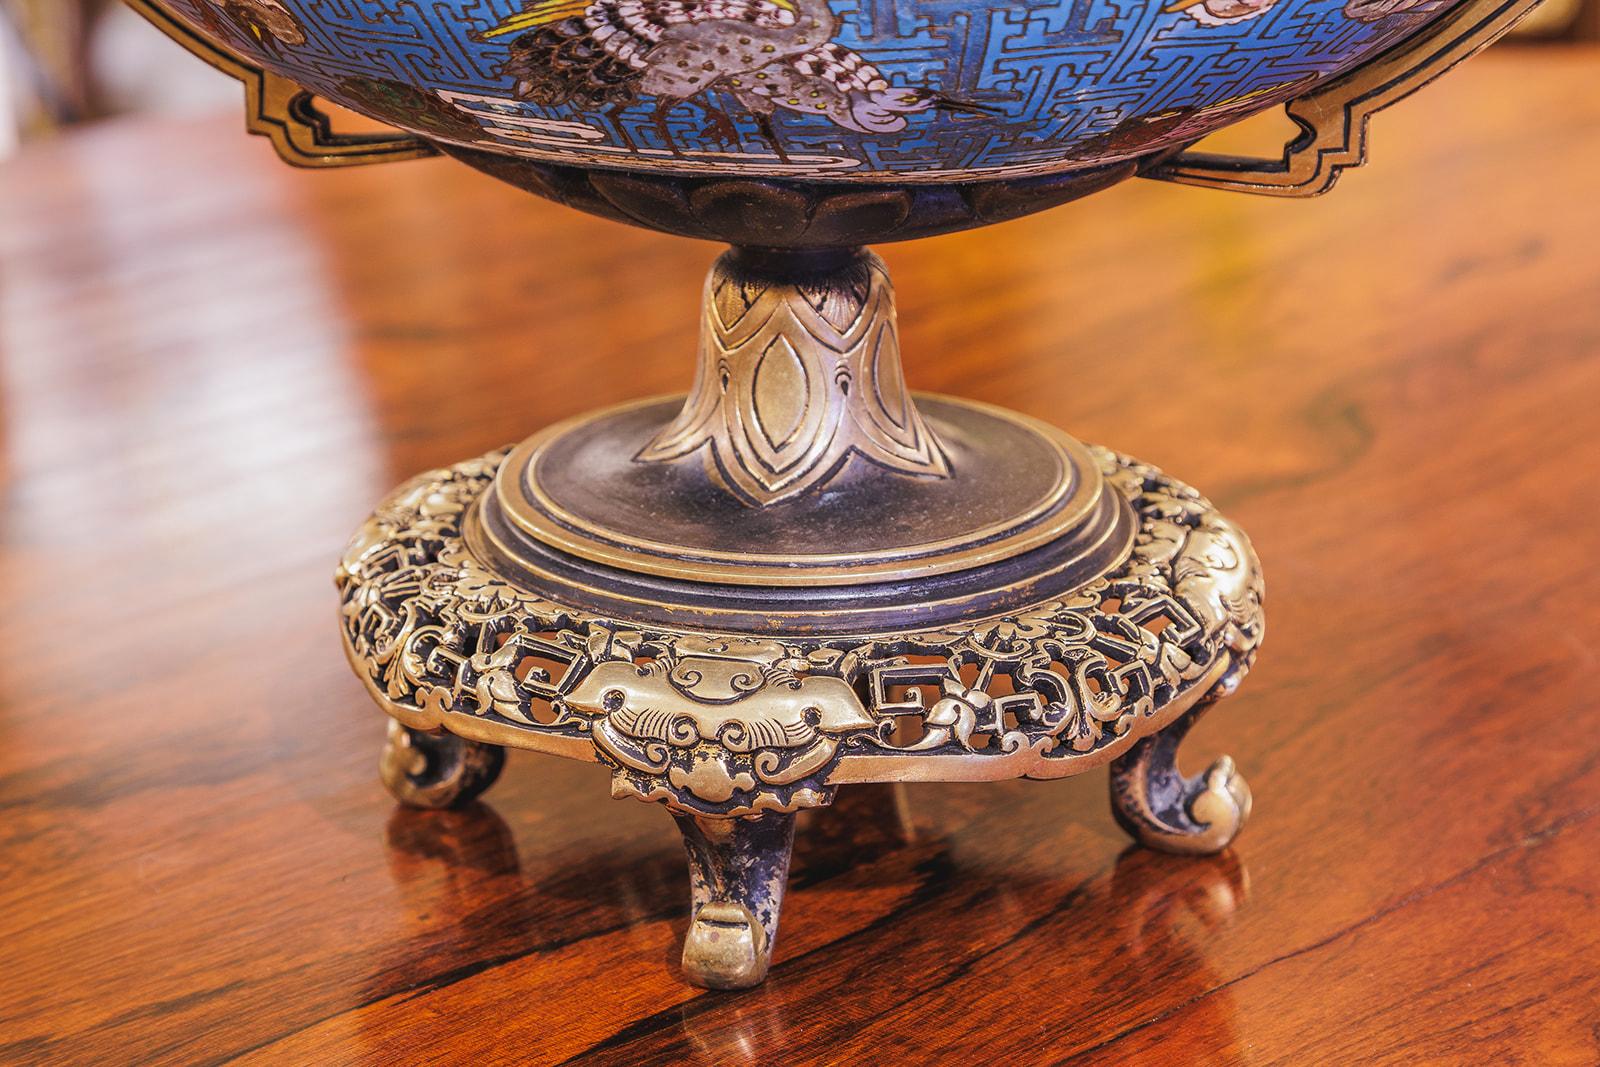 Chinese Export A very fine 19th century French Cloissone 11and gilt bronze centerpiece For Sale